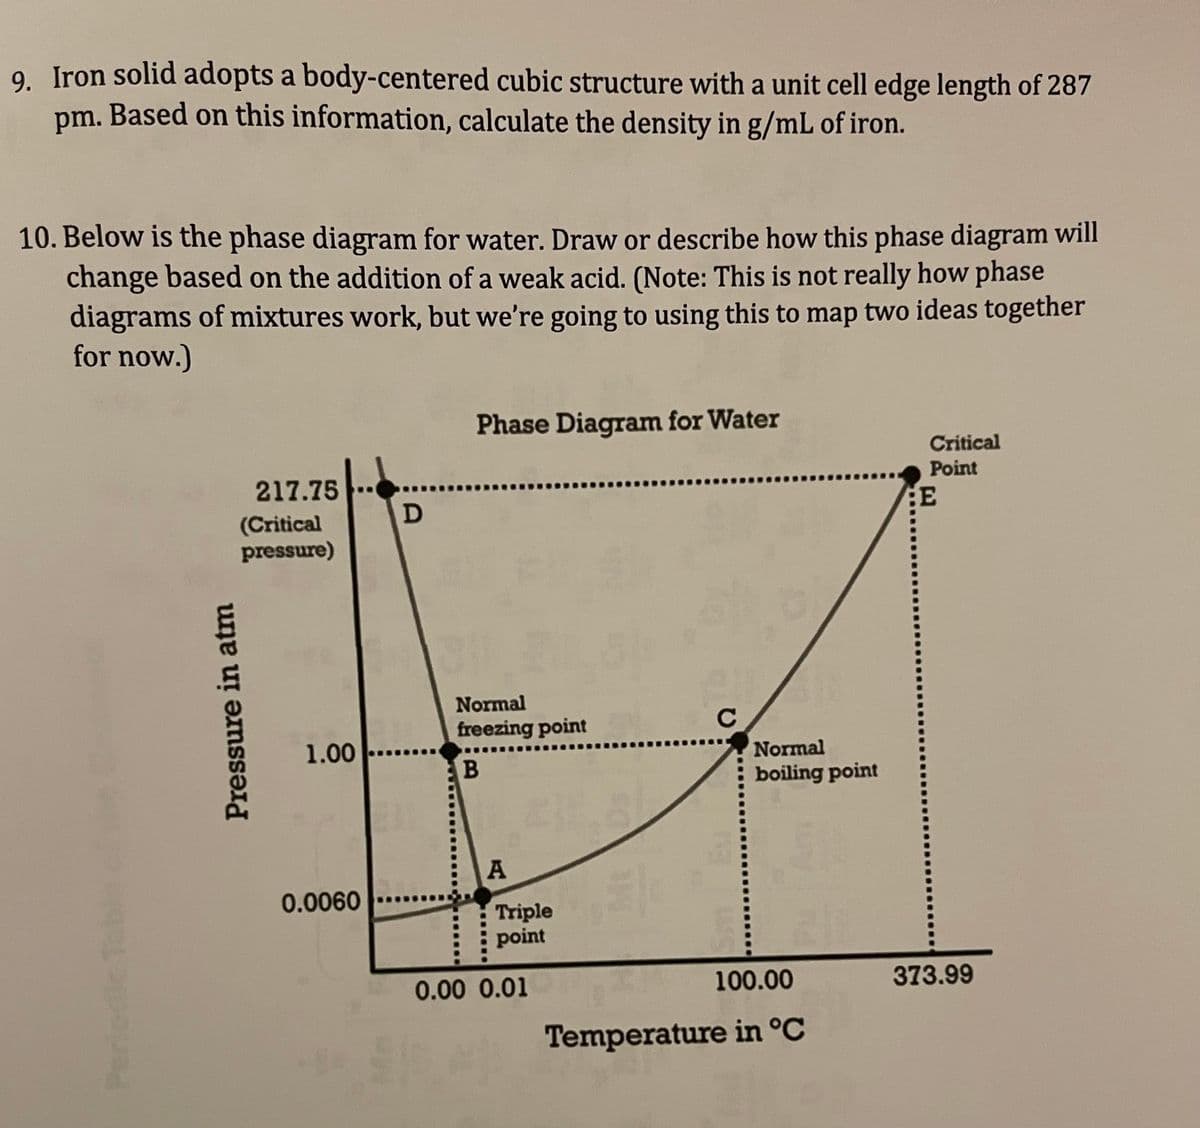 9. Iron solid adopts a body-centered cubic structure with a unit cell edge length of 287
pm. Based on this information, calculate the density in g/mL of iron.
10. Below is the phase diagram for water. Draw or describe how this phase diagram will
change based on the addition of a weak acid. (Note: This is not really how phase
diagrams of mixtures work, but we're going to using this to map two ideas together
for now.)
Pressure in atm
217.75
(Critical
pressure)
1.00
0.0060
D
Phase Diagram for Water
SP
Normal
freezing point
B
A
Triple
point
0.00 0.01
Ek
C
Normal
boiling point
100.00
Temperature in °C
Critical
Point
E
373.99